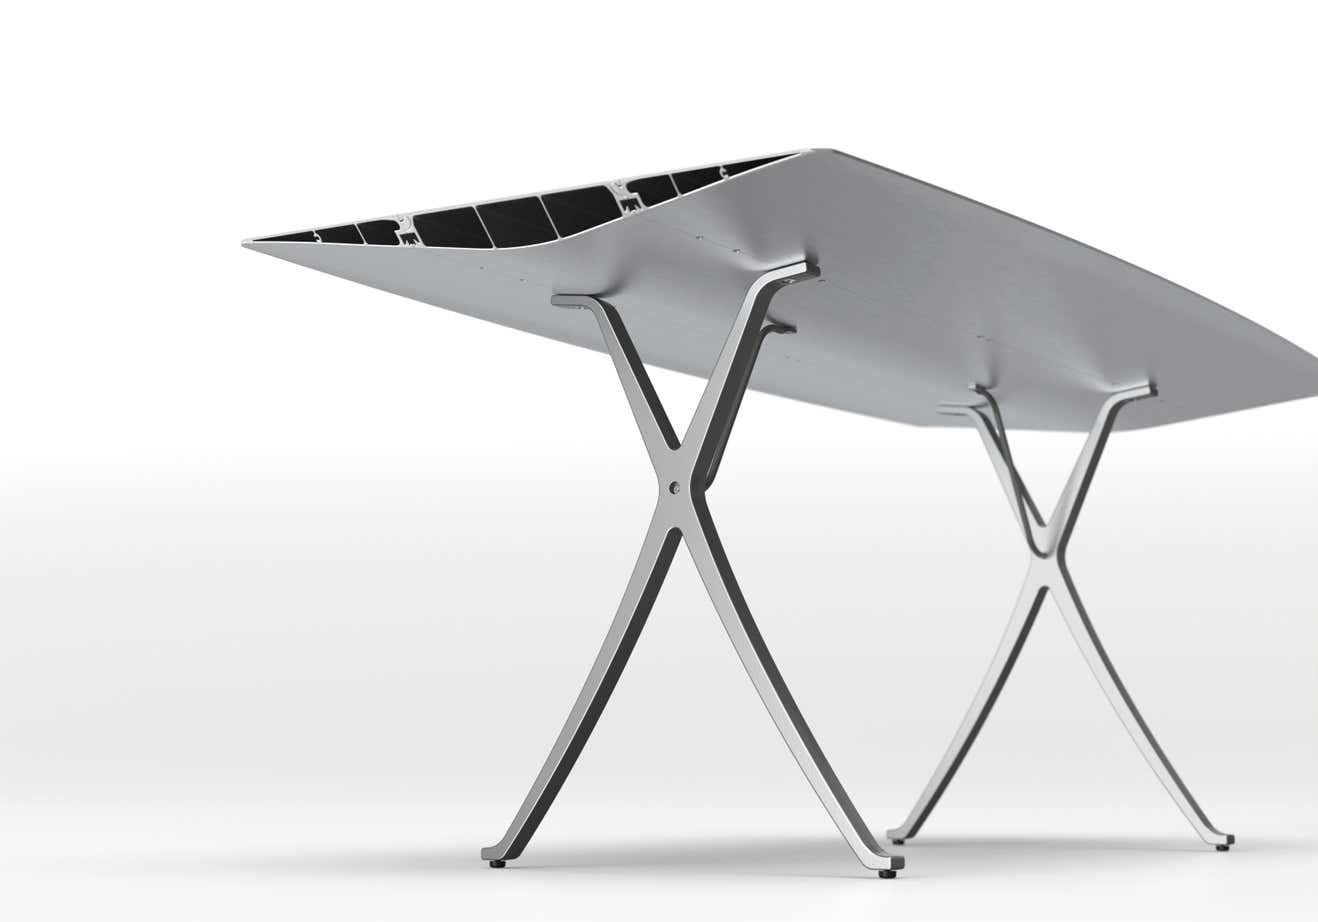 Outdoor Garden Table B 90cm Anodized Silver Top with Aluminum Legs

Materials: 
Aluminium

Dimensions: 
D 90 cm x W 300 cm x H 74 cm

The Table B, which inaugurated the Extrusions Collection in 2009, can reach up to five metres using a